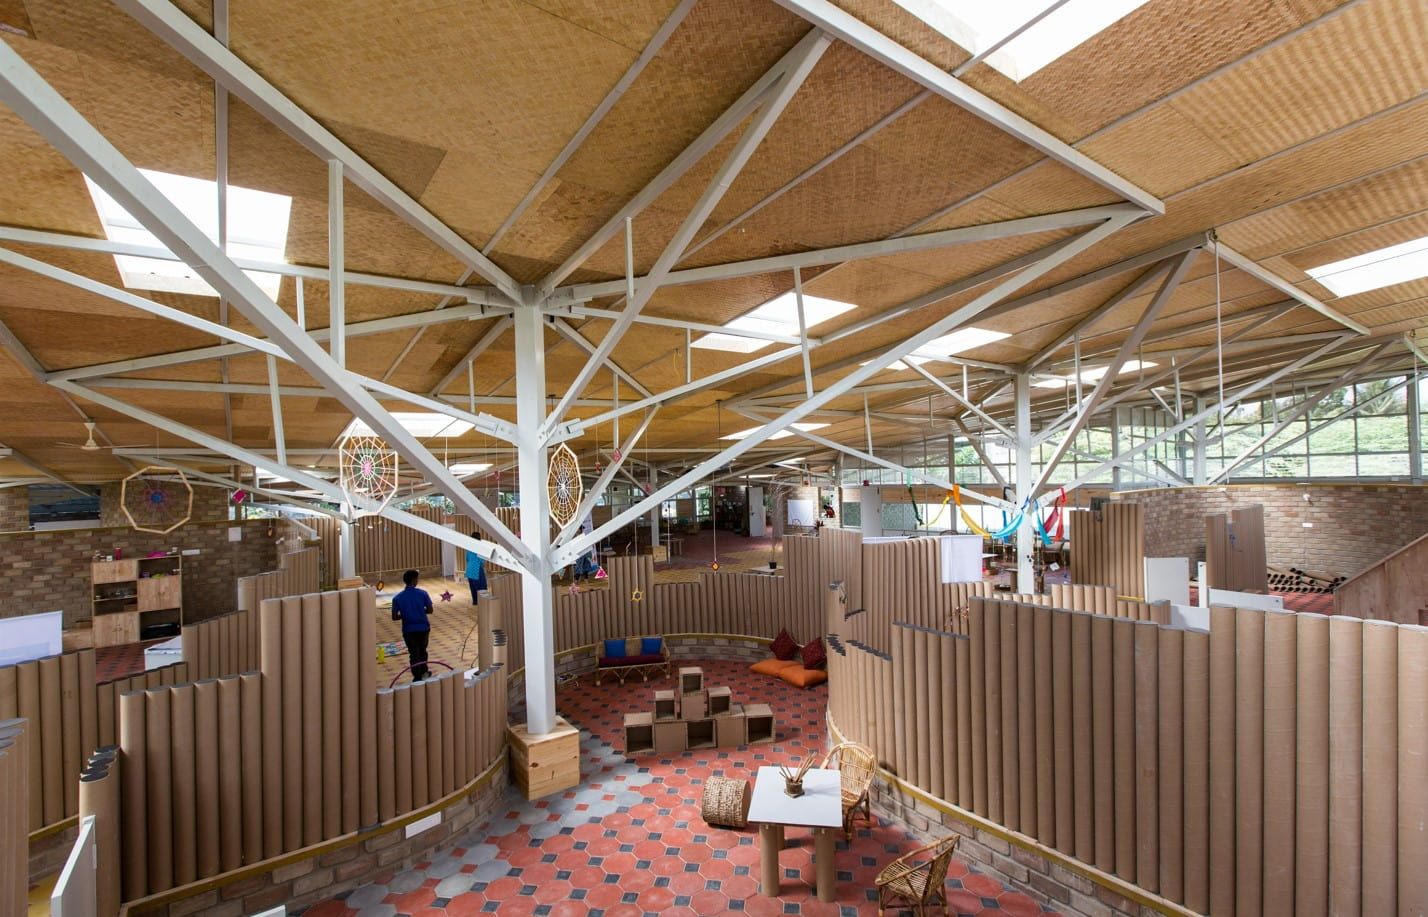 the interiors of the Atelier designed with cardboard tubes and tree-like structures